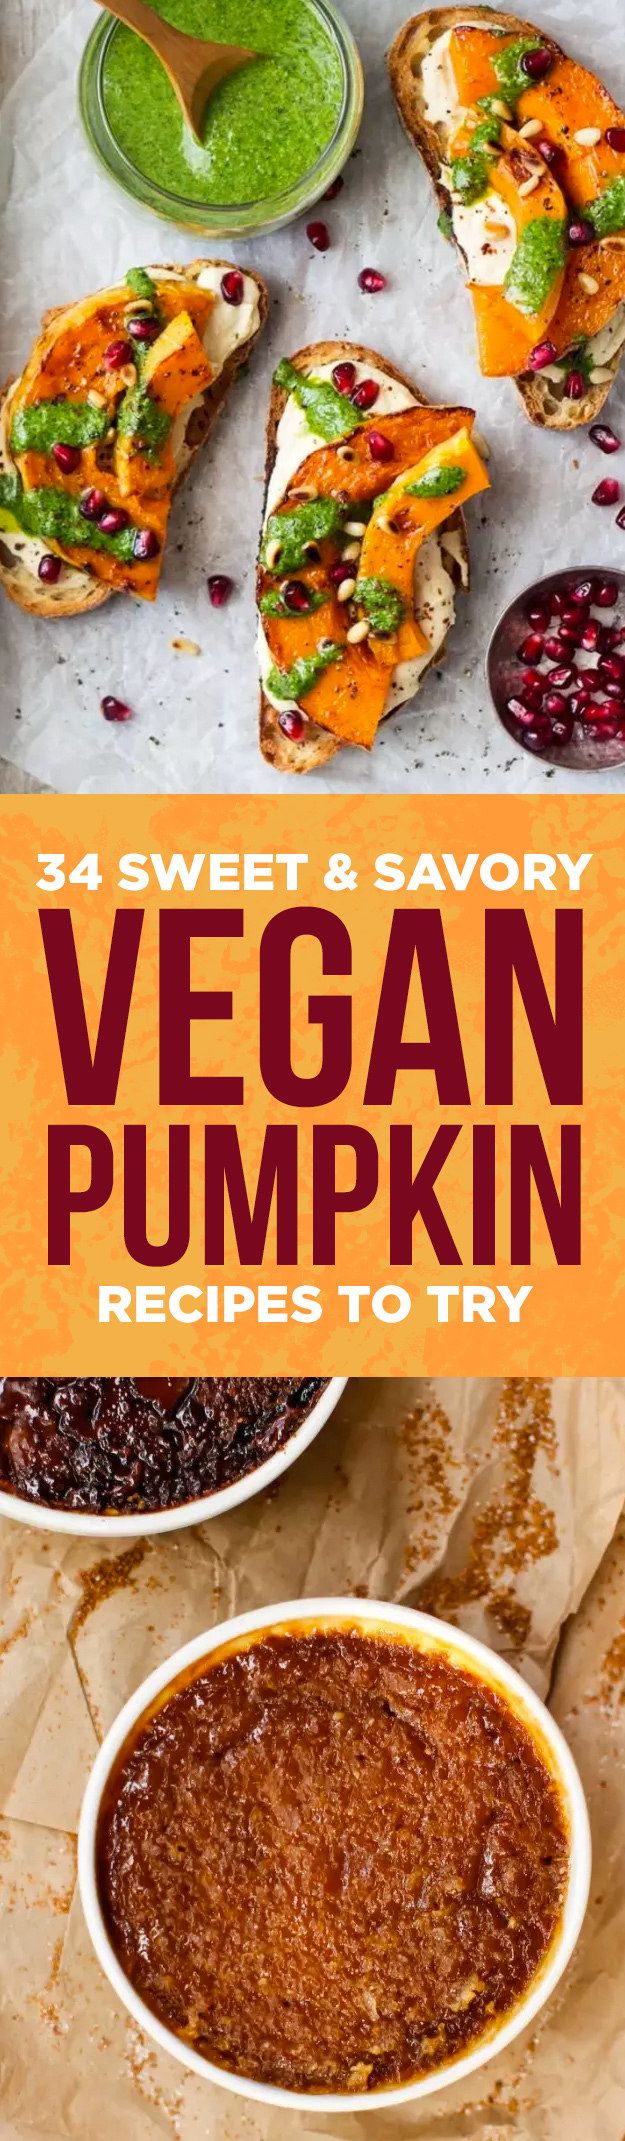 31 Sweet And Savory Pumpkin Recipes With No Meat Or Dairy